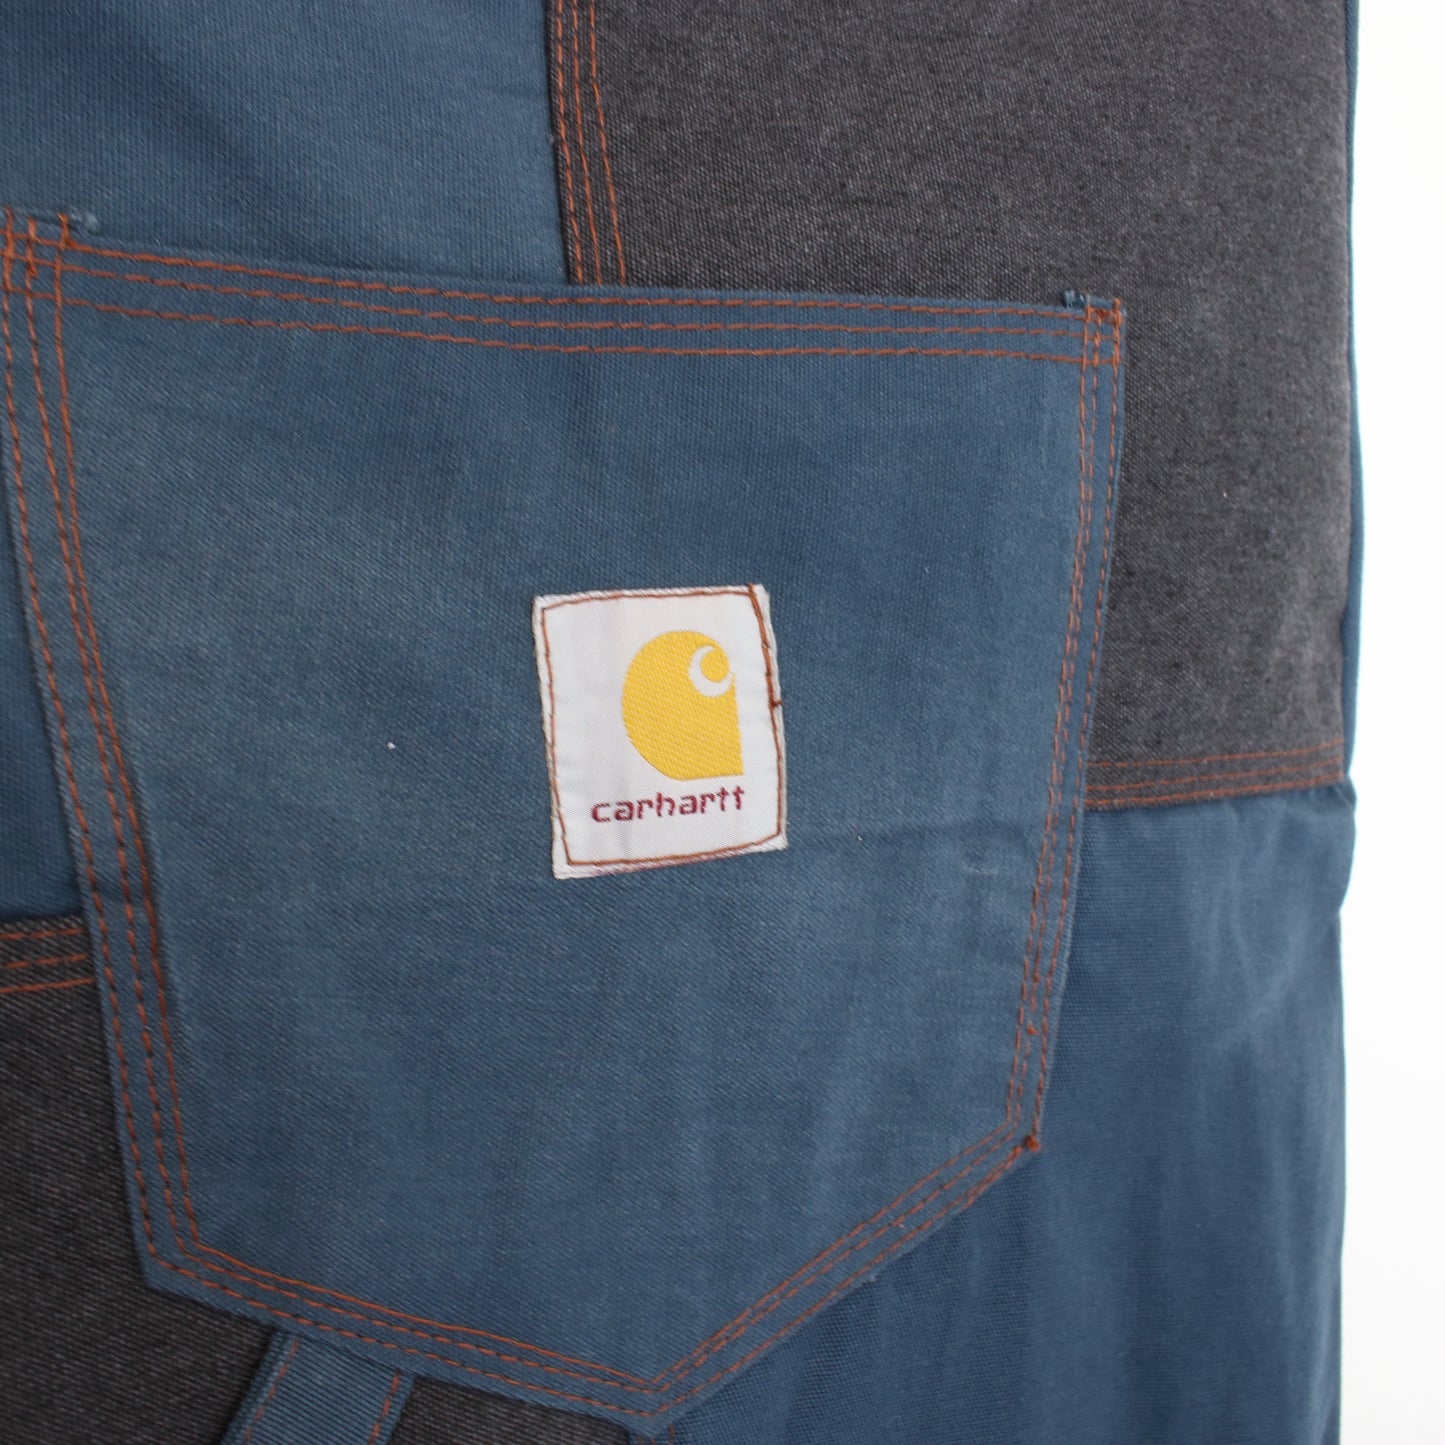 Vintage Carhartt reworked tote bag in multiple colours.